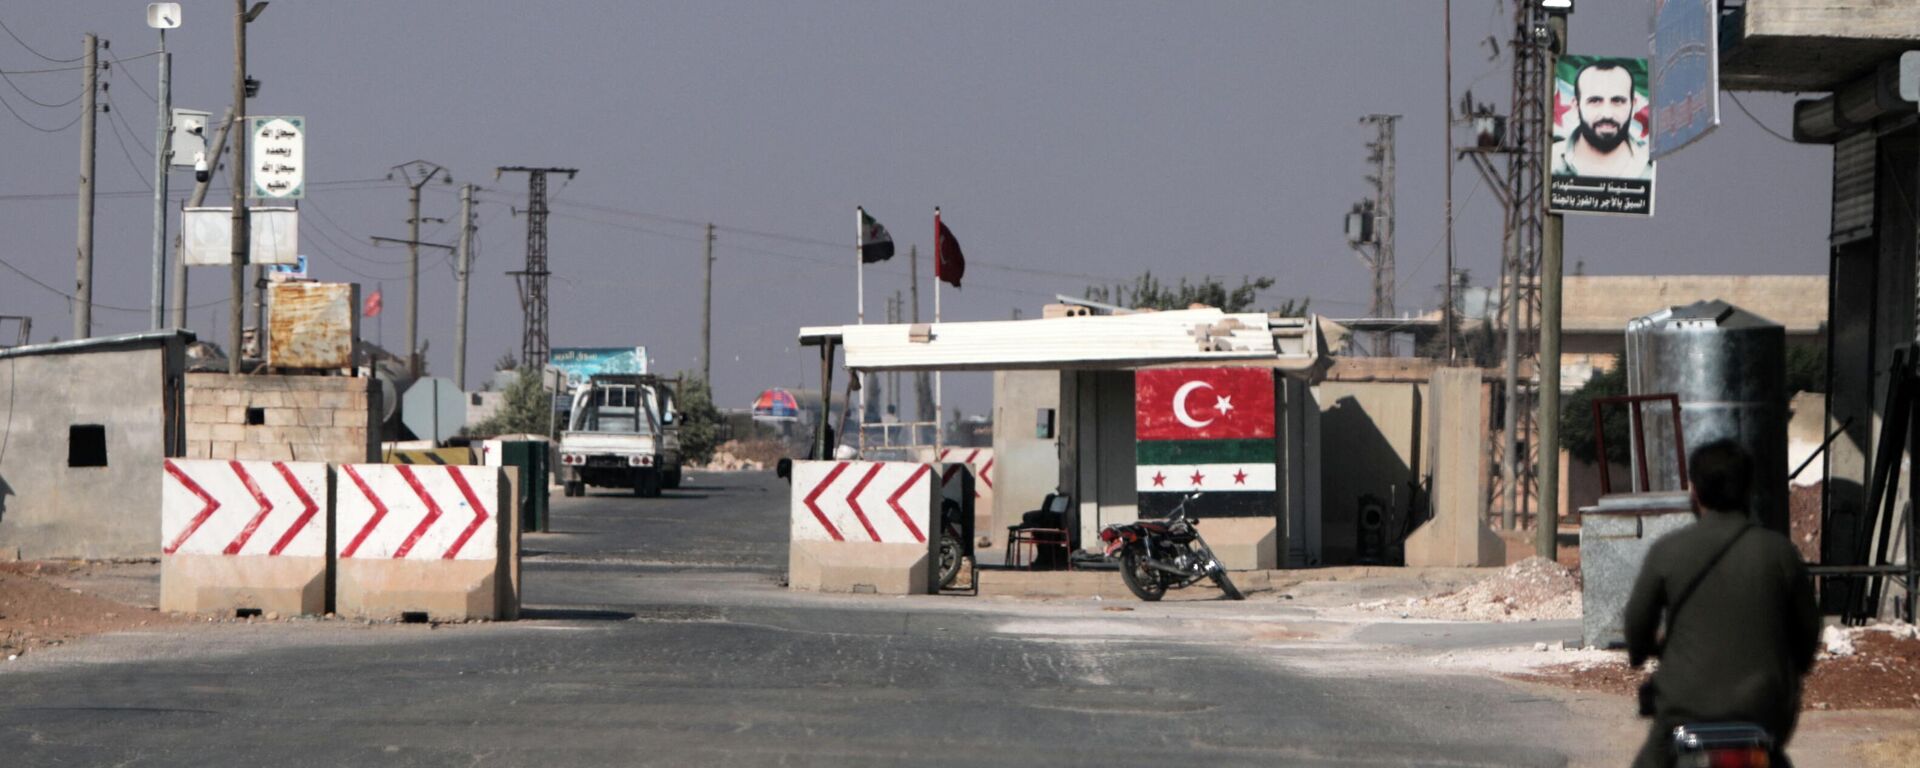 Turkey-backed Syrian fighters man a checkpoint in the town of Marea in the  northern Aleppo governorate, facing the Kurdish-controlled area of Tal Rifaat, on August 2, 2022.  - Sputnik International, 1920, 08.08.2022